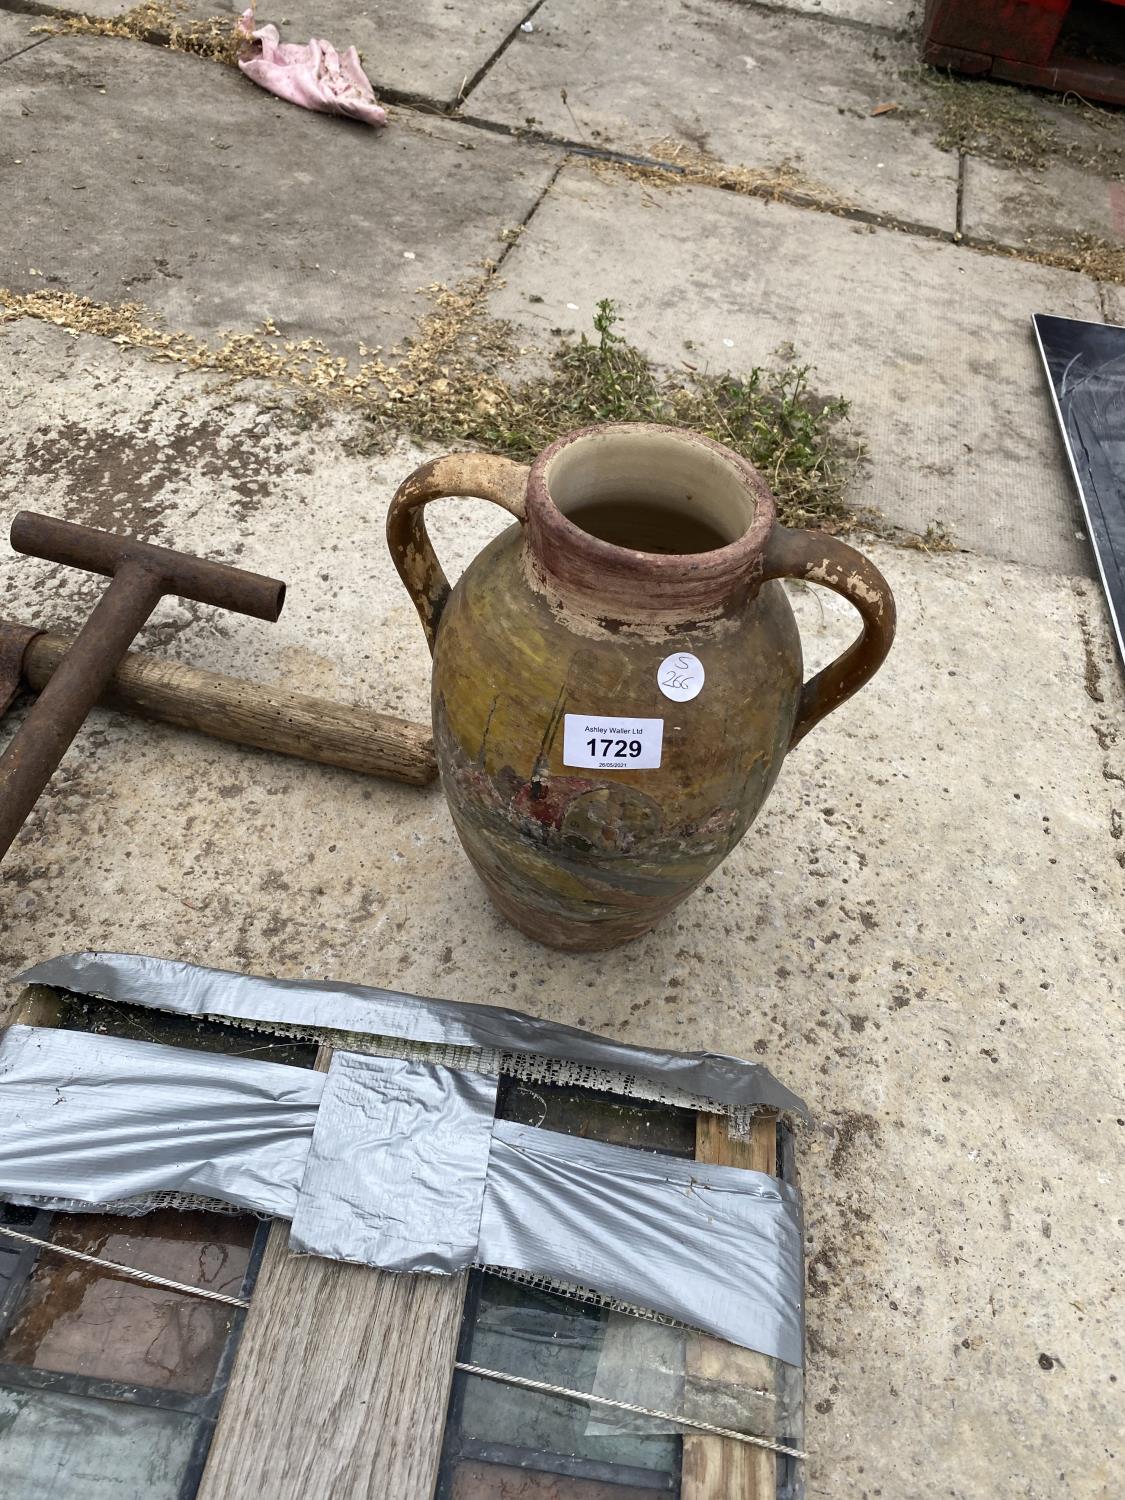 VARIOUS VINTAGE ITEMS - A TWO MAN SAW, STAINED GLASS WINDOW, A JUG ETC - Image 4 of 4